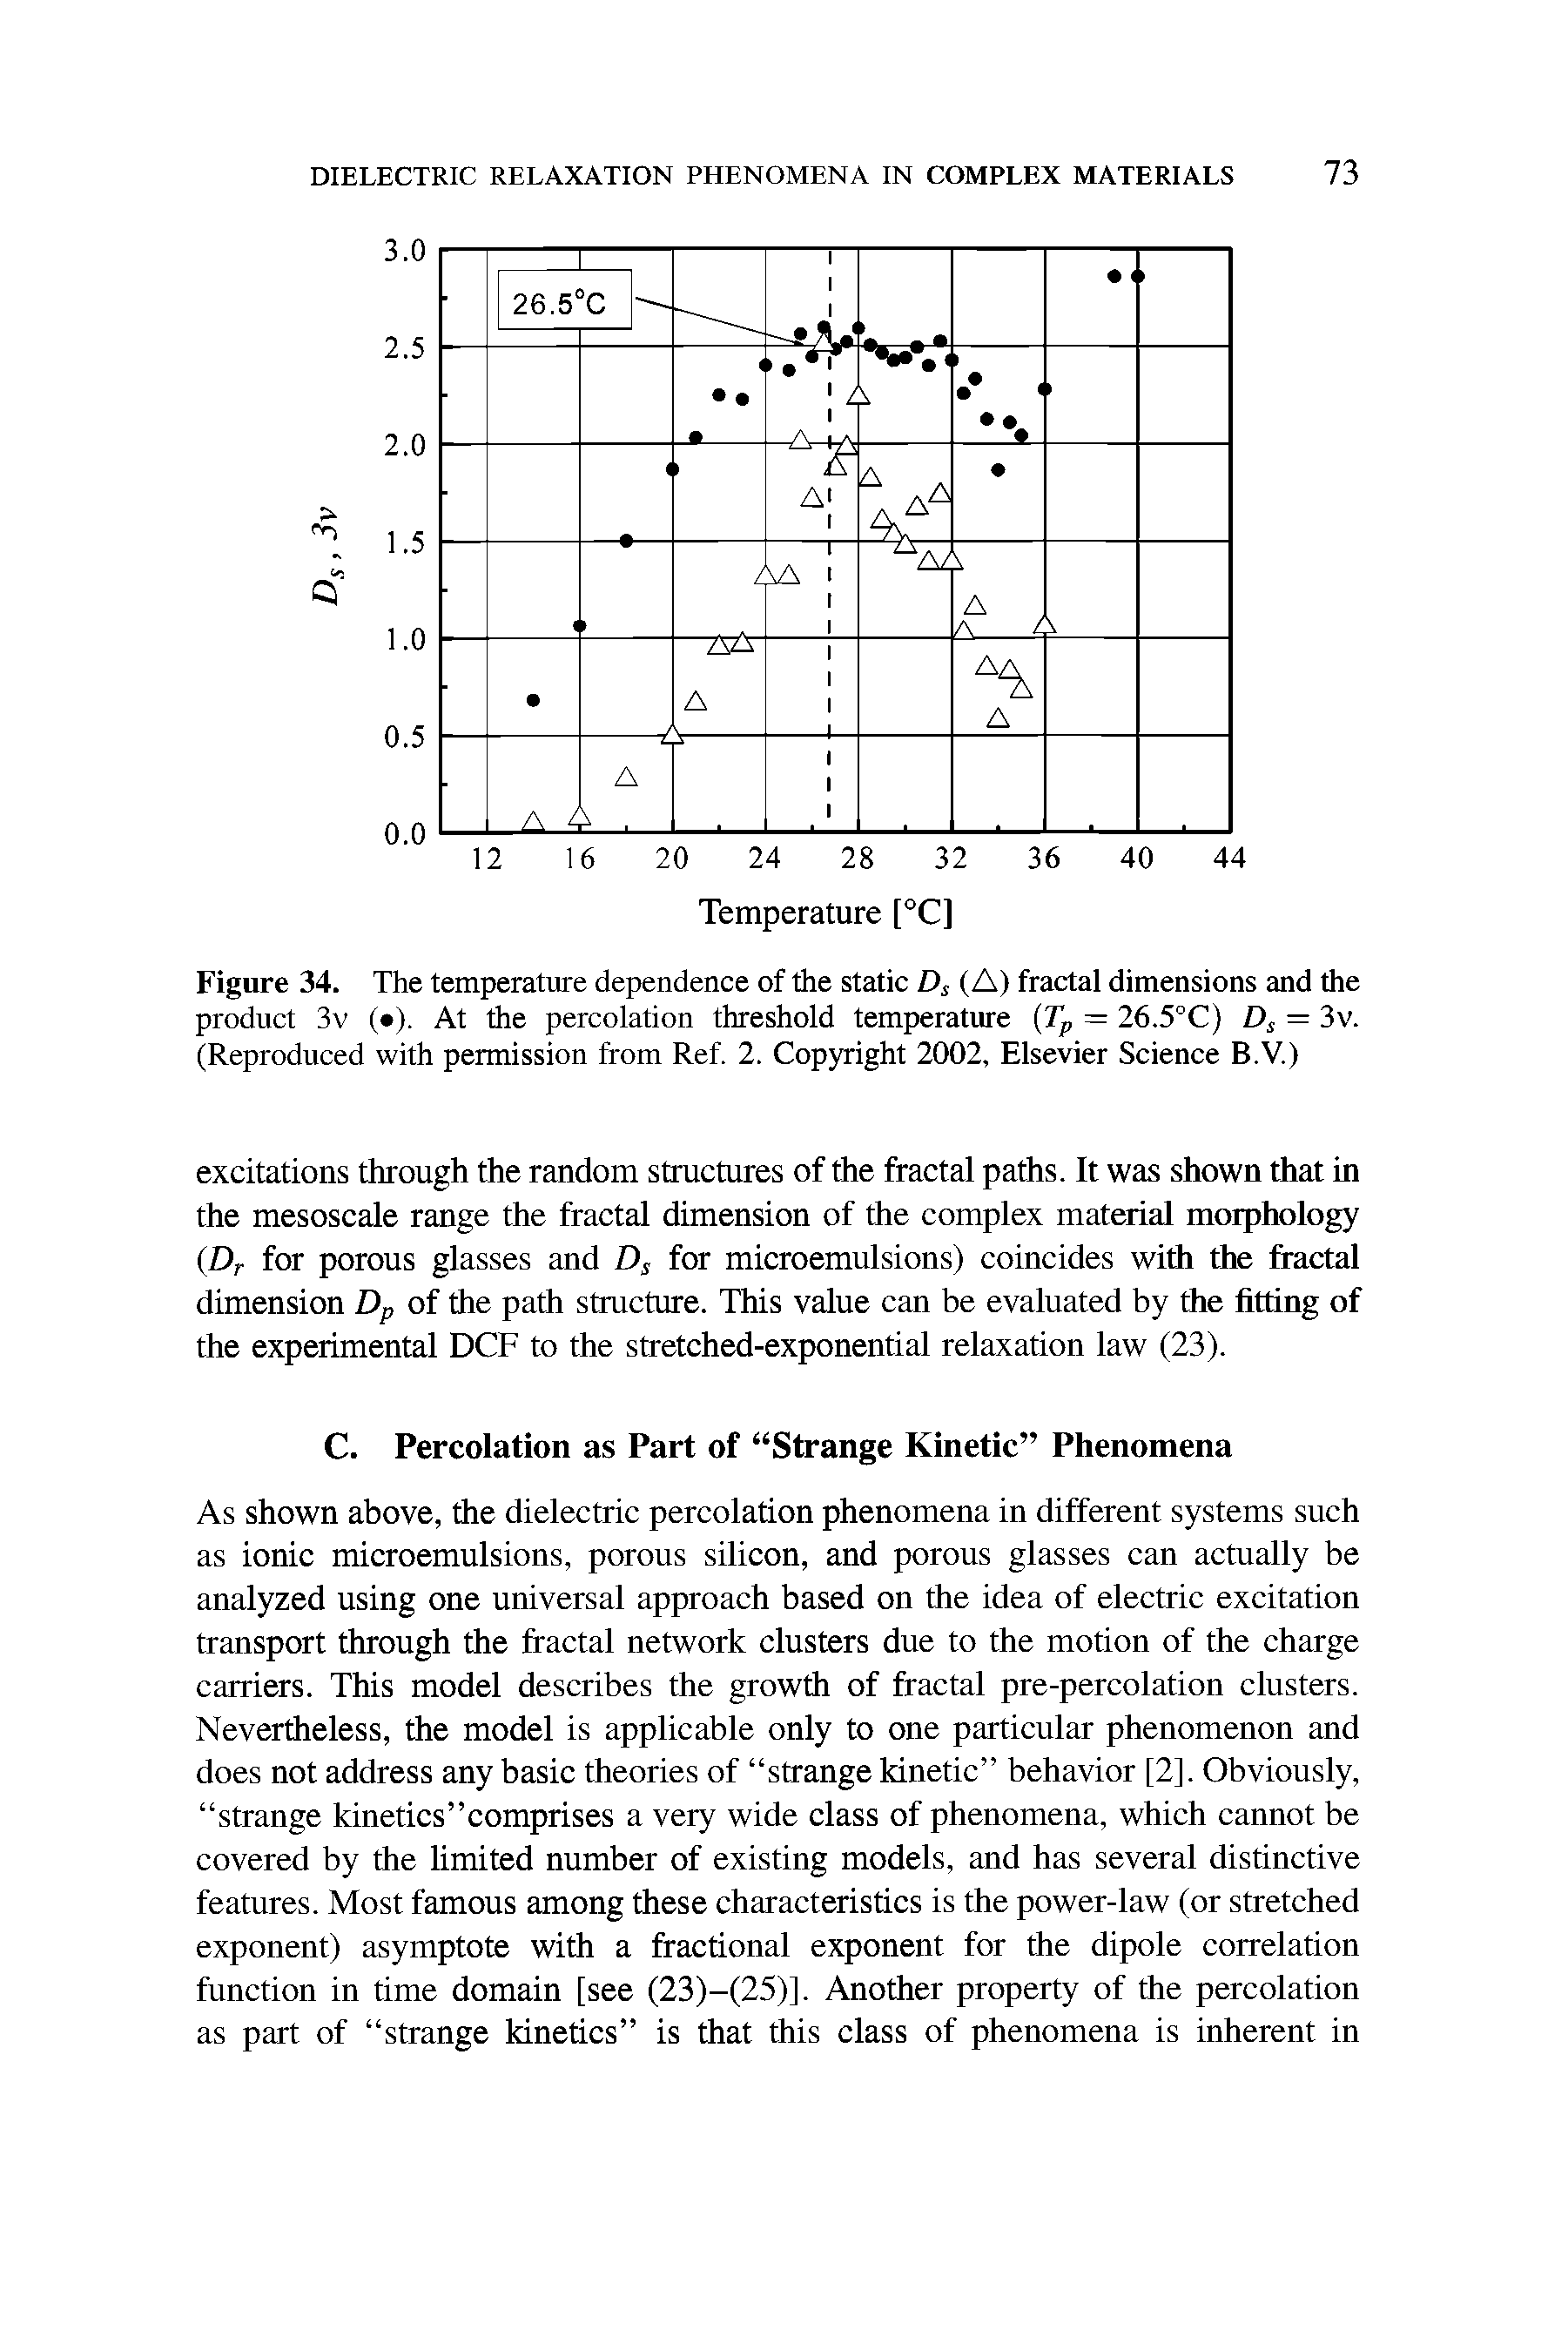 Figure 34. The temperature dependence of the static Ds (A) fractal dimensions and the product 3v ( ). At the percolation threshold temperature (Tp = 26.5°C) Ds = 3v. (Reproduced with permission from Ref. 2. Copyright 2002, Elsevier Science B.V.)...